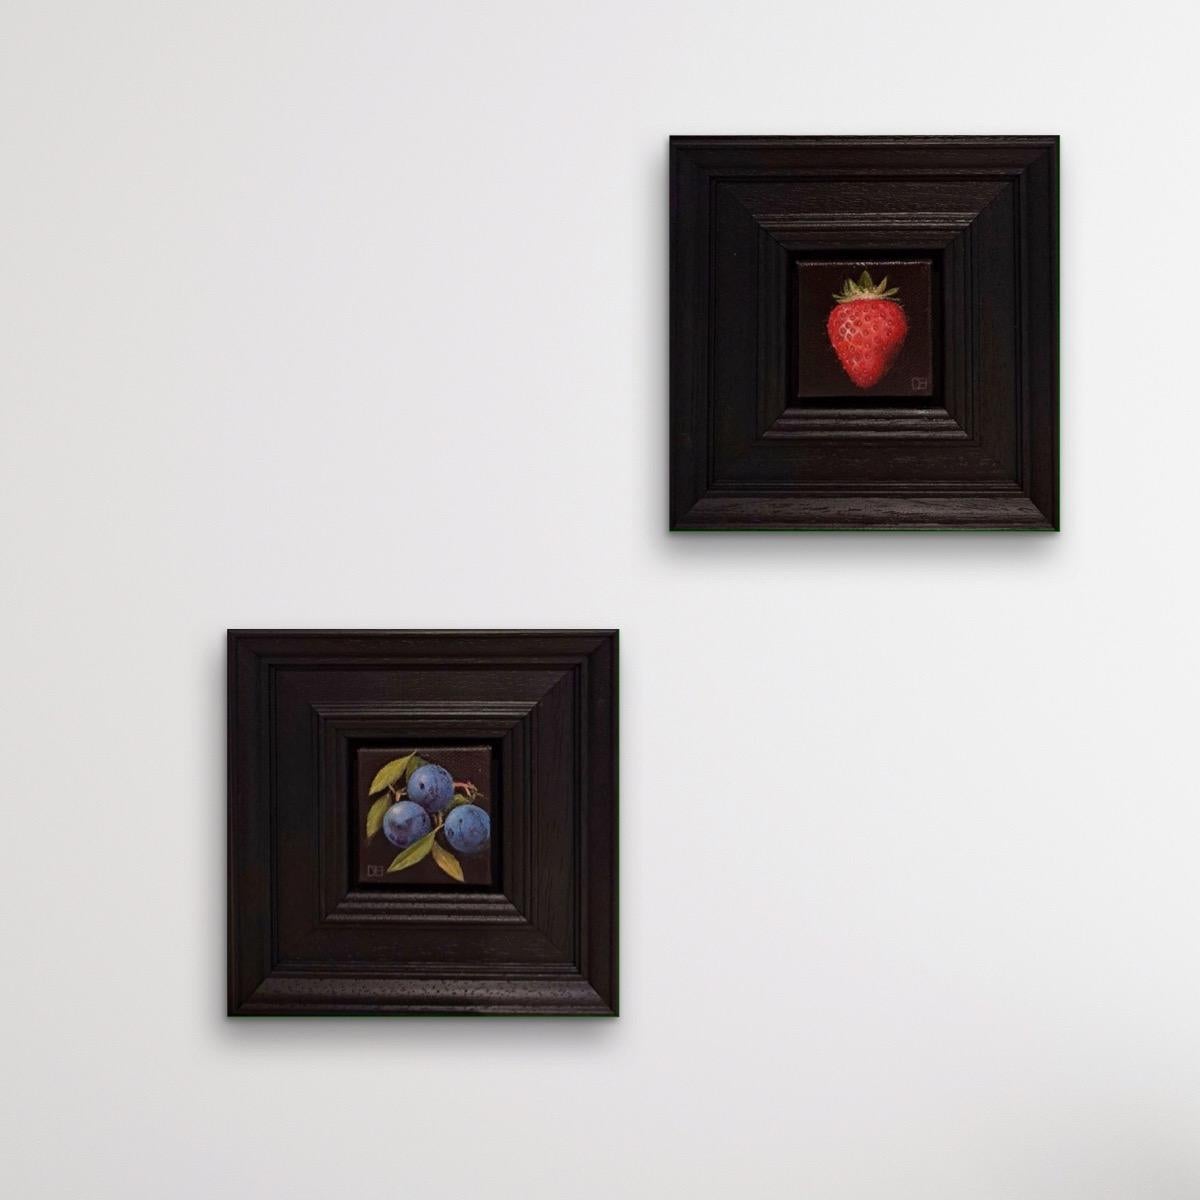 Diptych, Pocket red strawberry, Pocket blue sloes, food art, still-life - Painting by Dani Humberstone